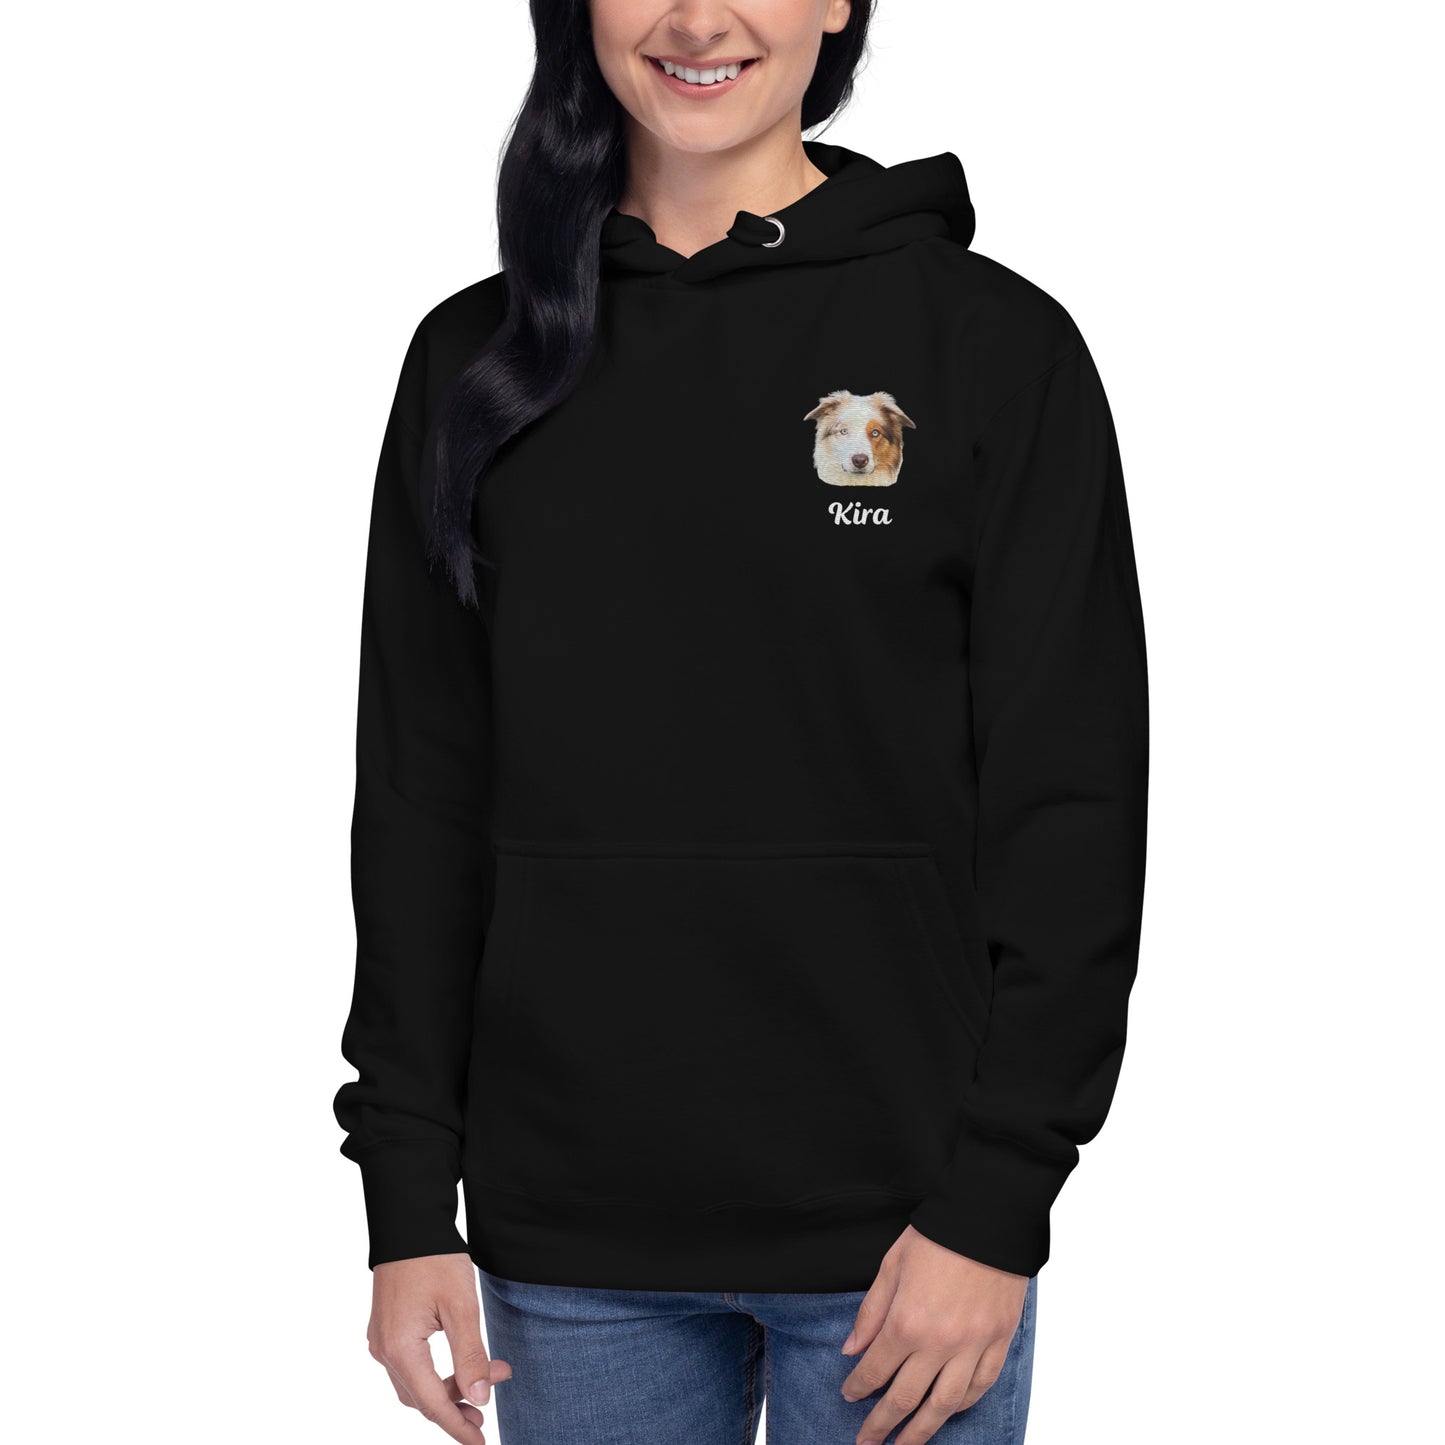 Personalized embroidered hoodie